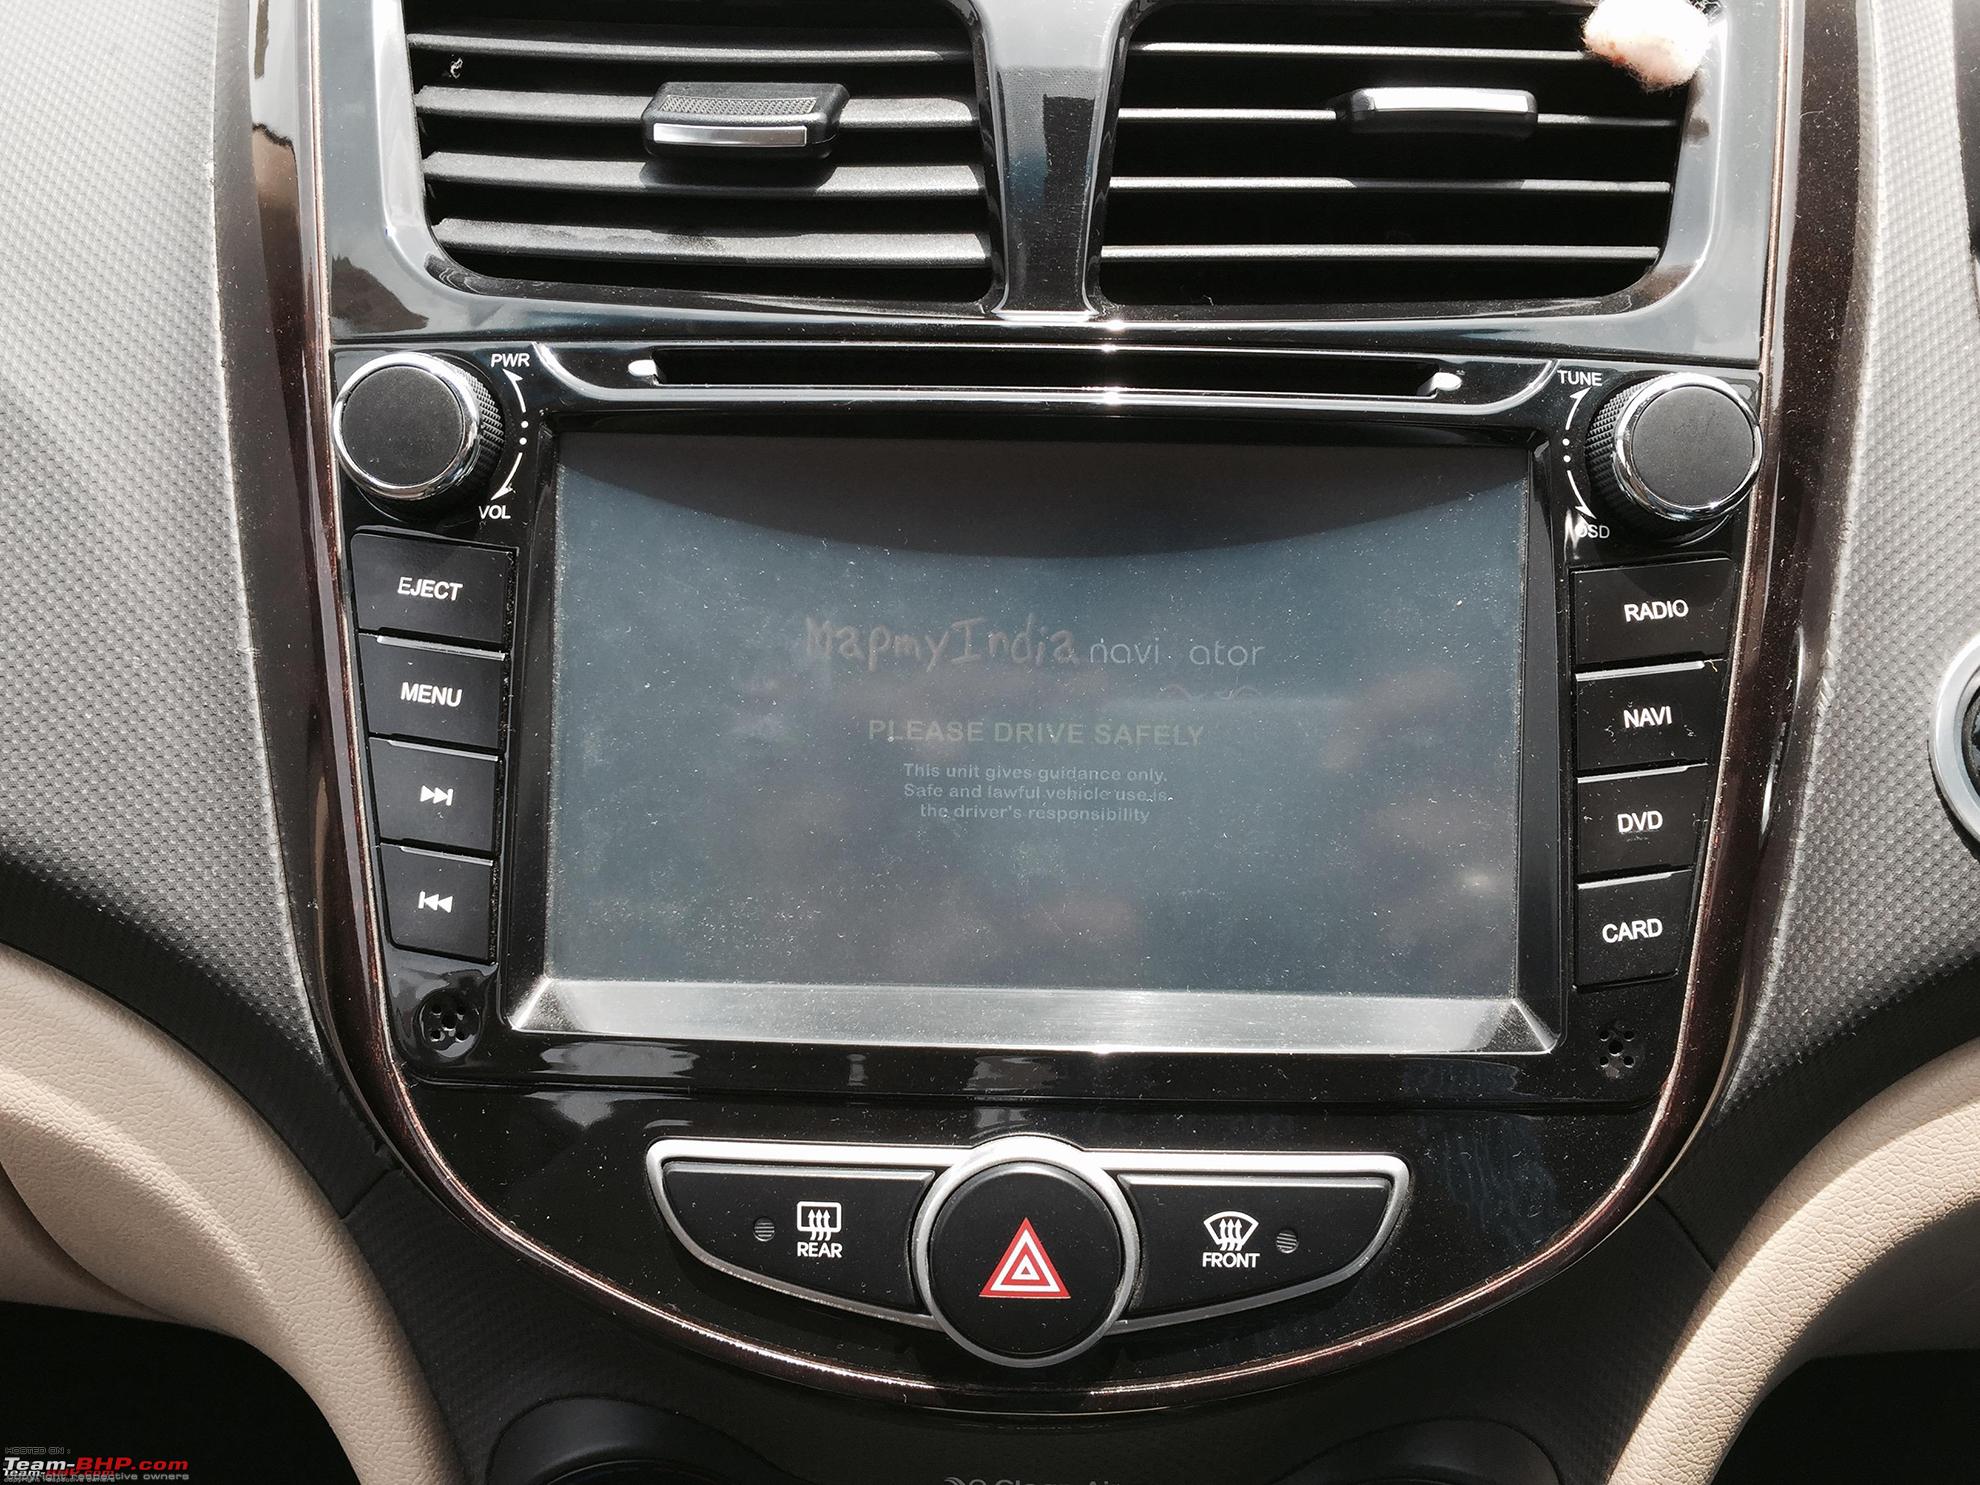 Hyundai Fluidic Verna : Upgraded to OEM Head-Unit with Touchscreen,  Navigation & more - Team-BHP